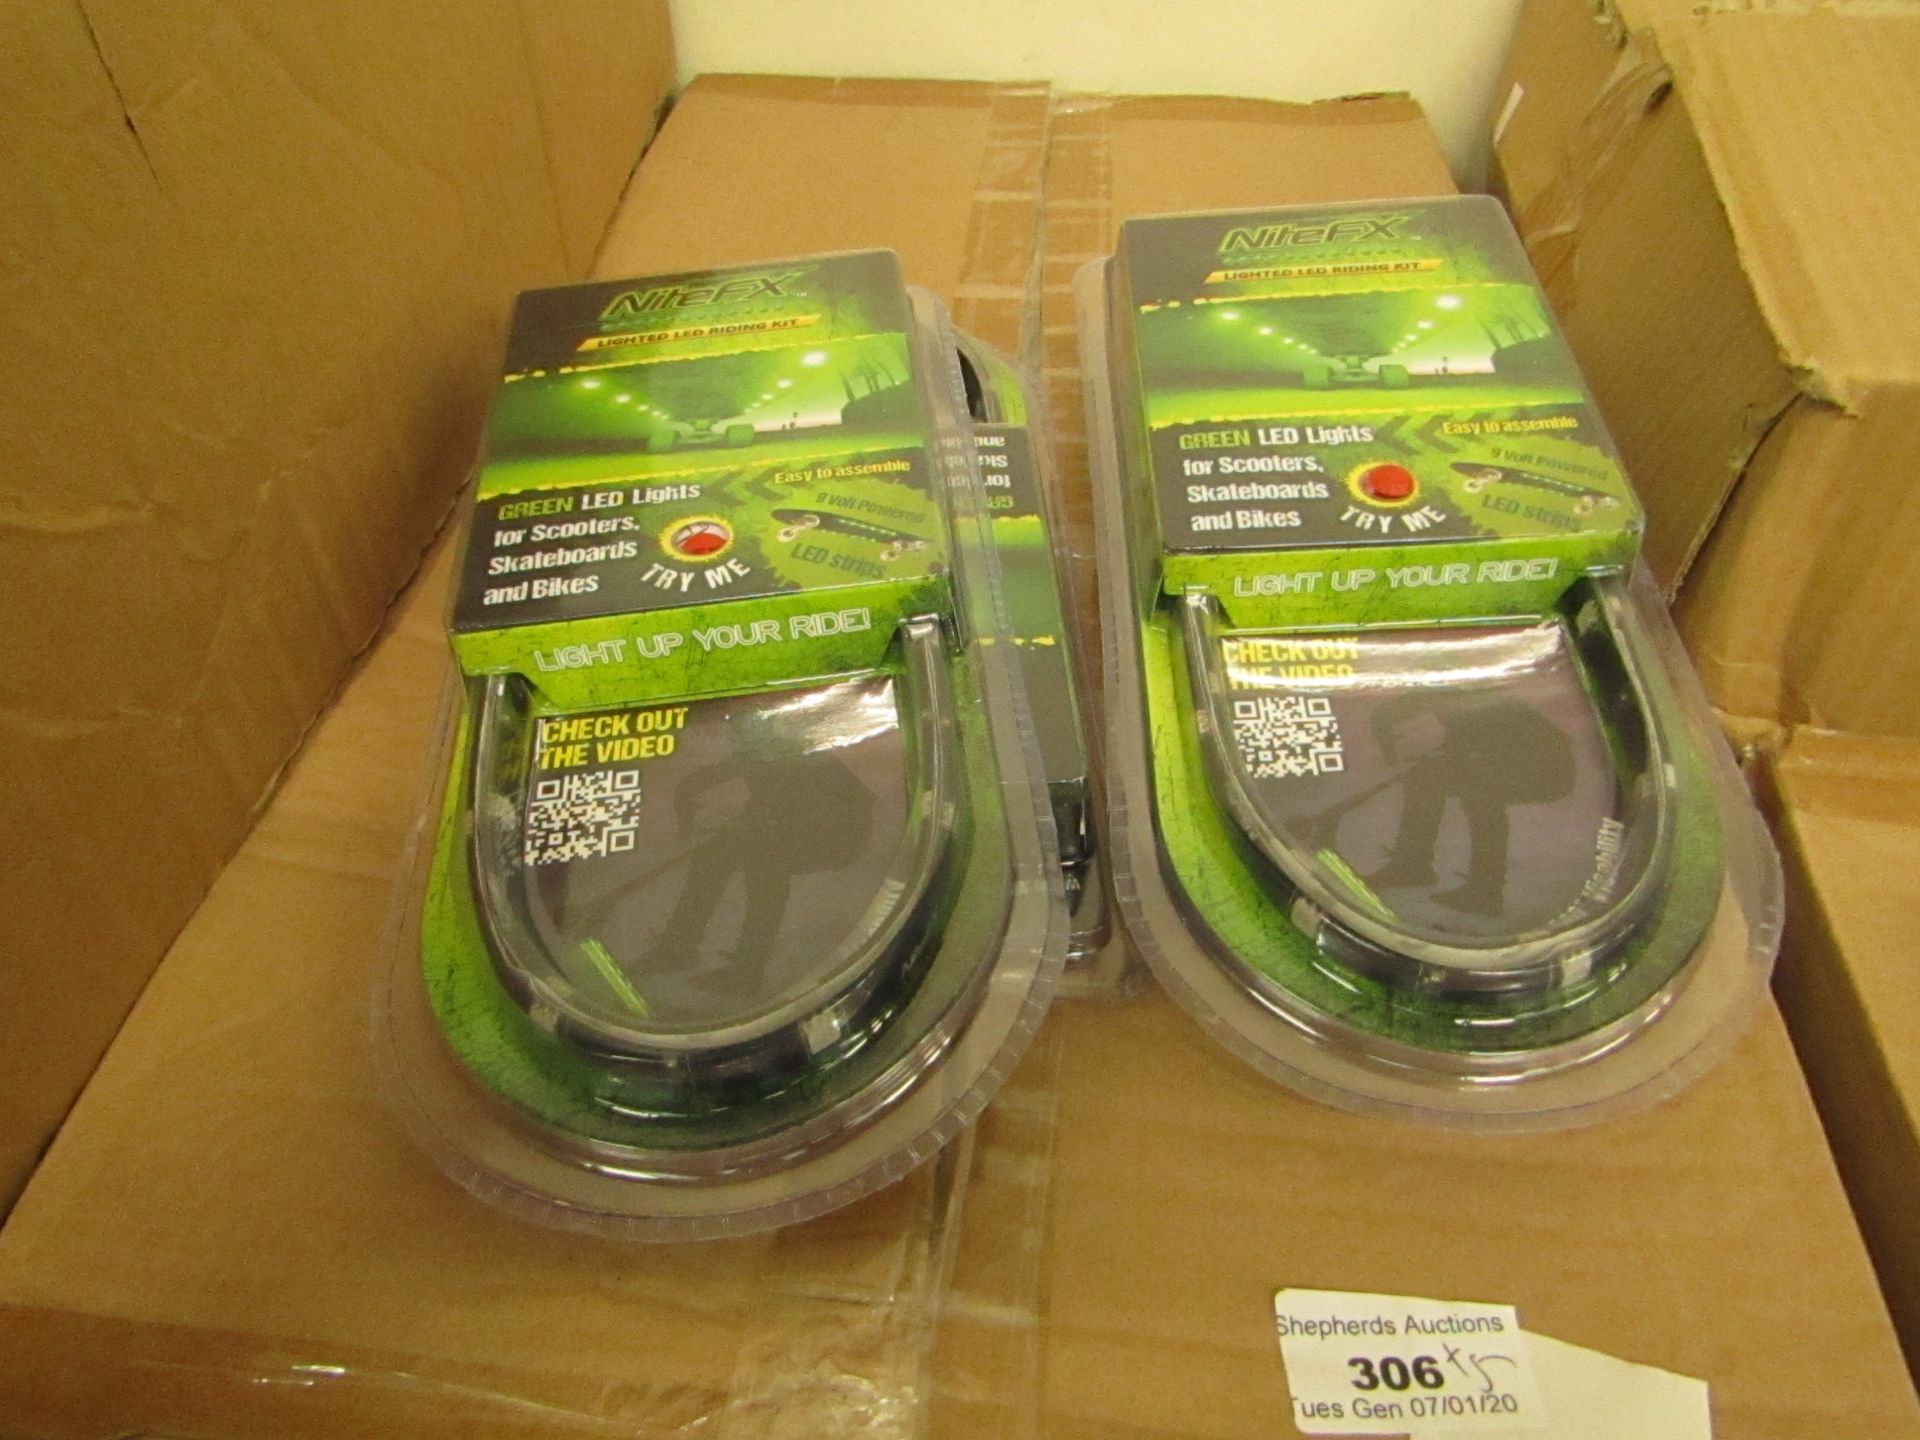 5X NiteFX - Light up LED riding kit (Green) - Untested, packaged and boxed.